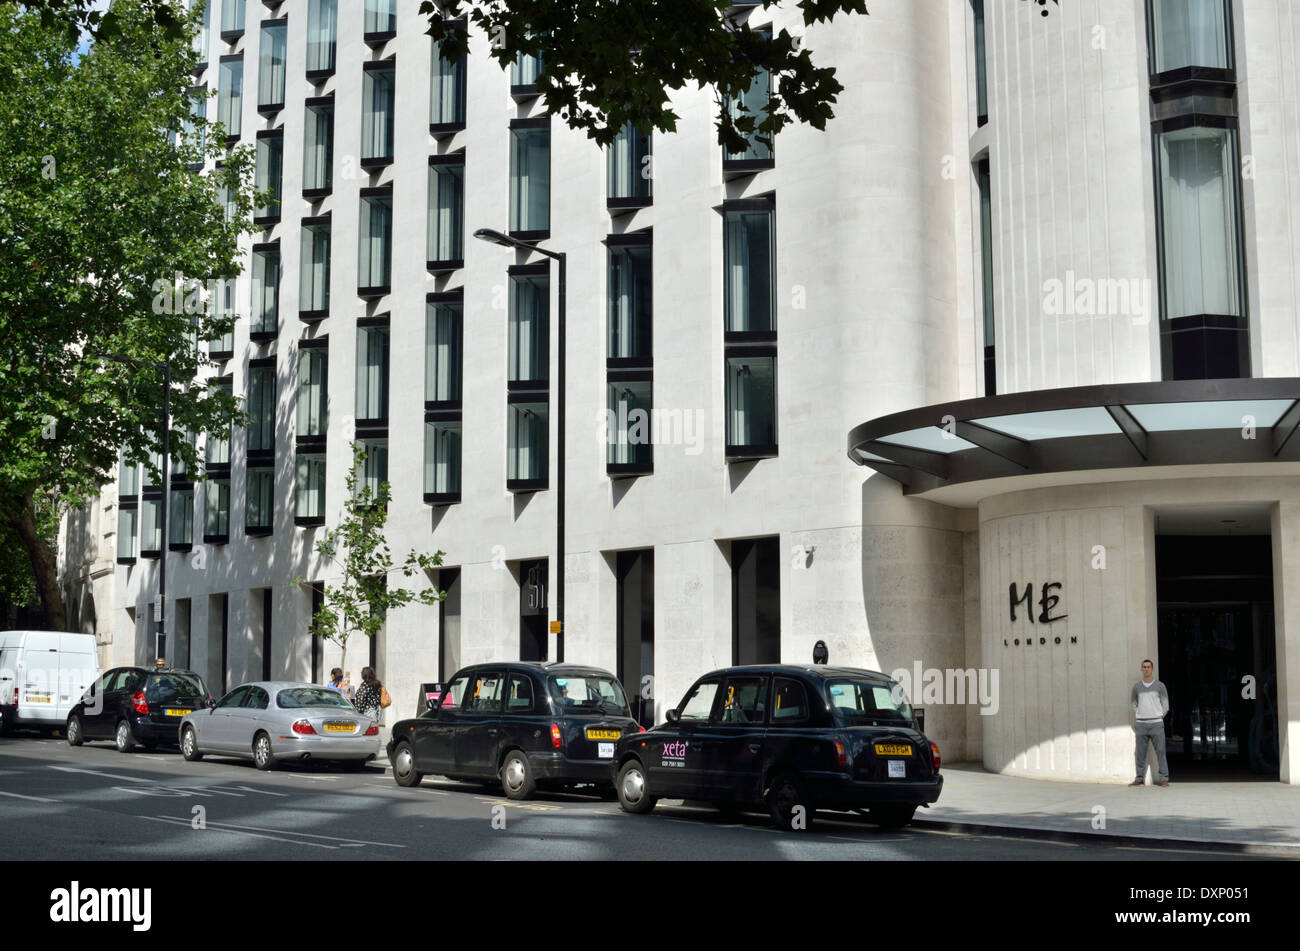 The ME London Hotel in The Strand, Aldwych, London, UK. Stock Photo